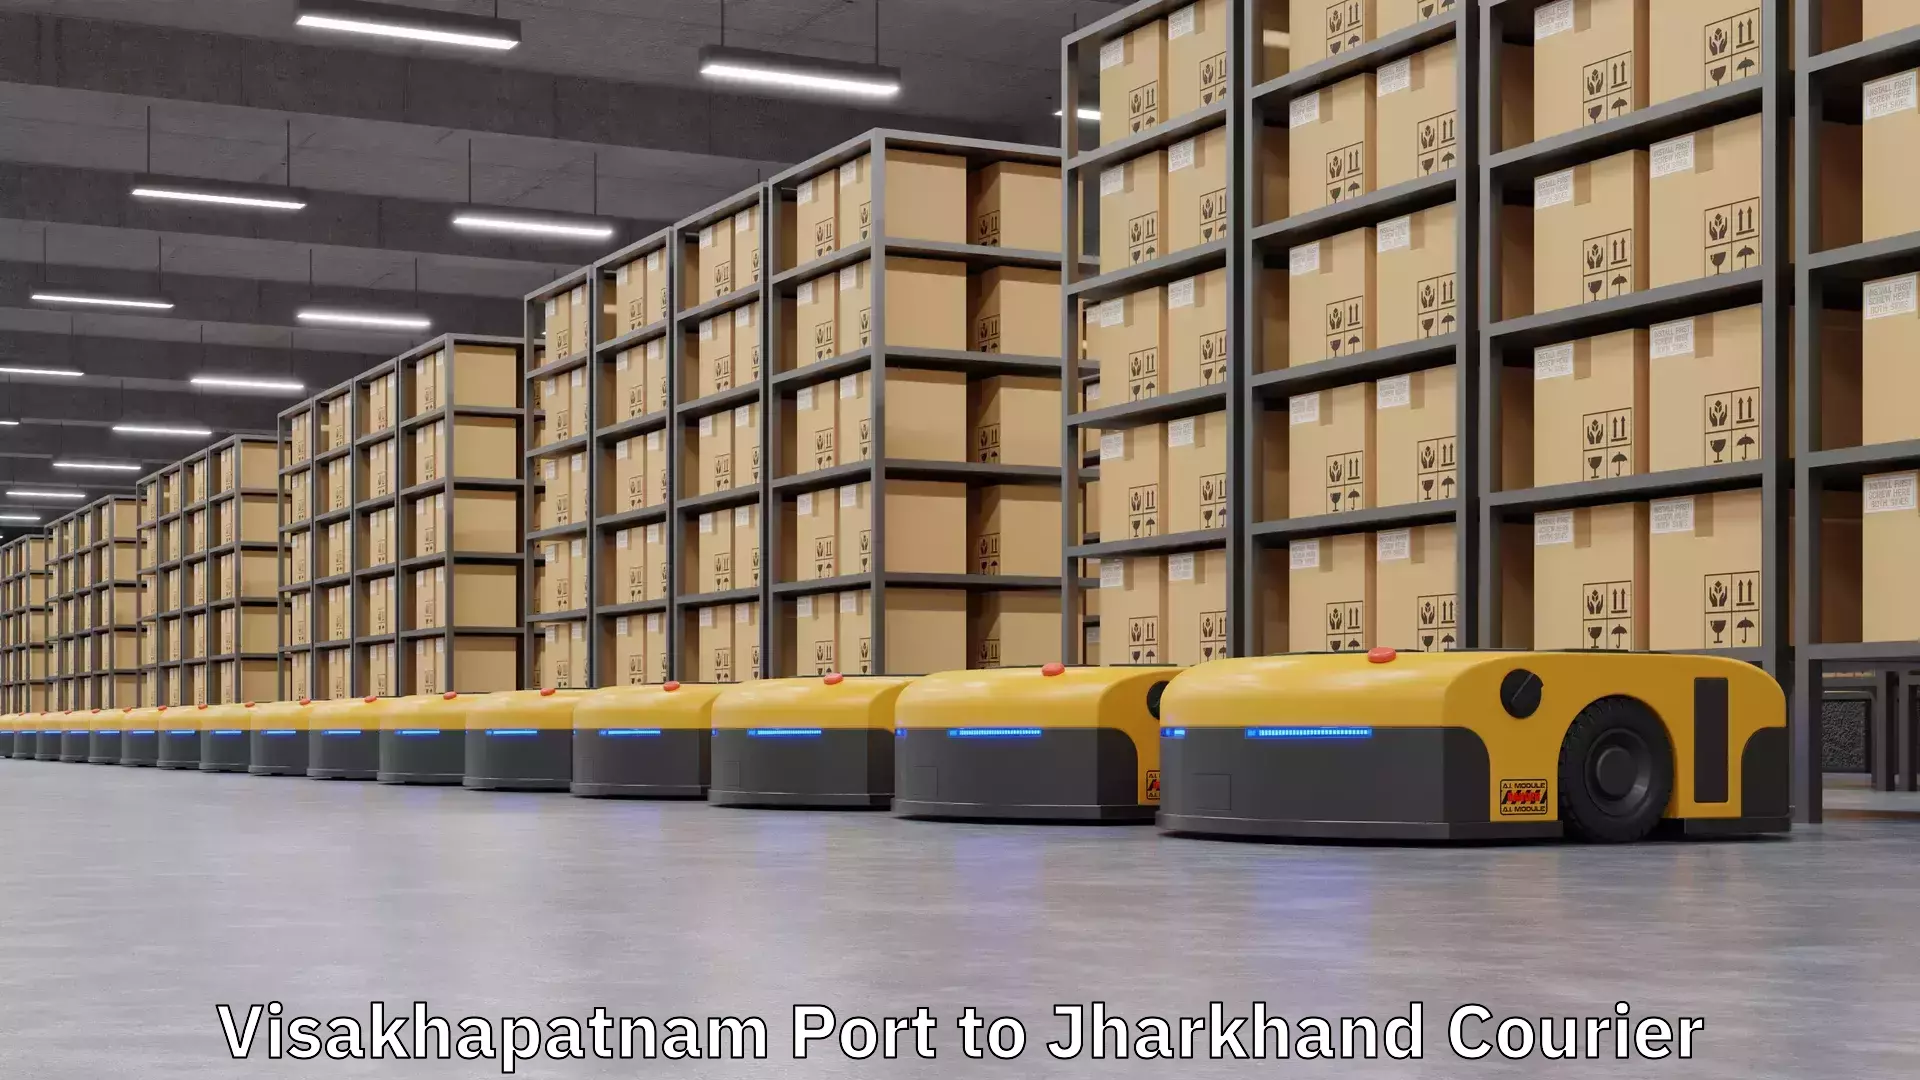 Courier services in Visakhapatnam Port to Jharkhand